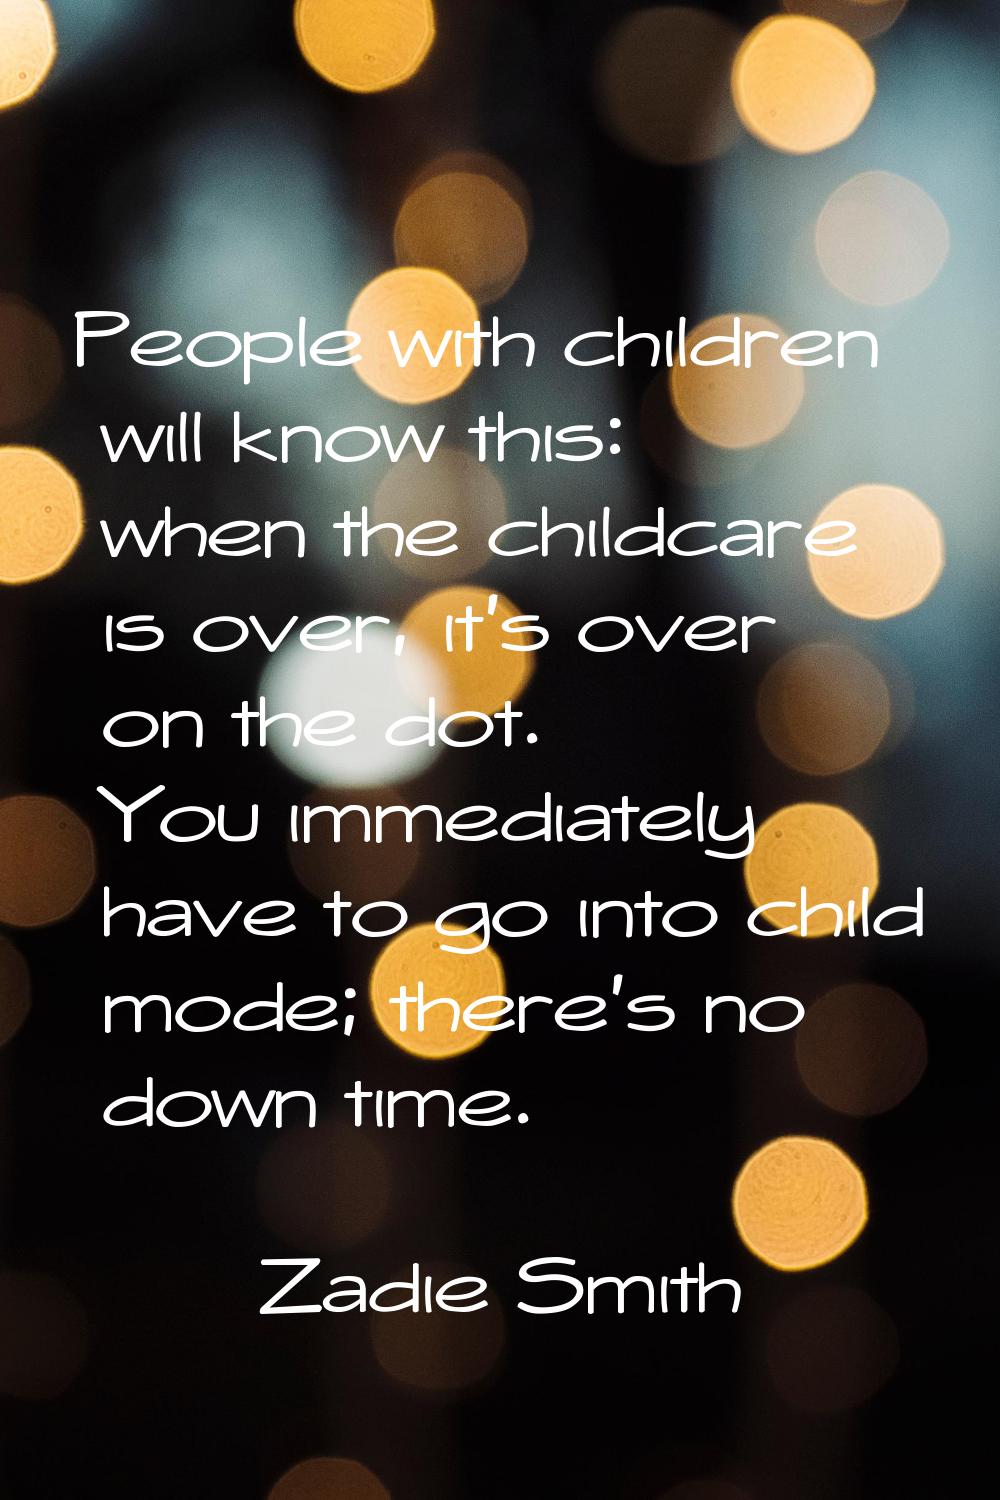 People with children will know this: when the childcare is over, it's over on the dot. You immediat